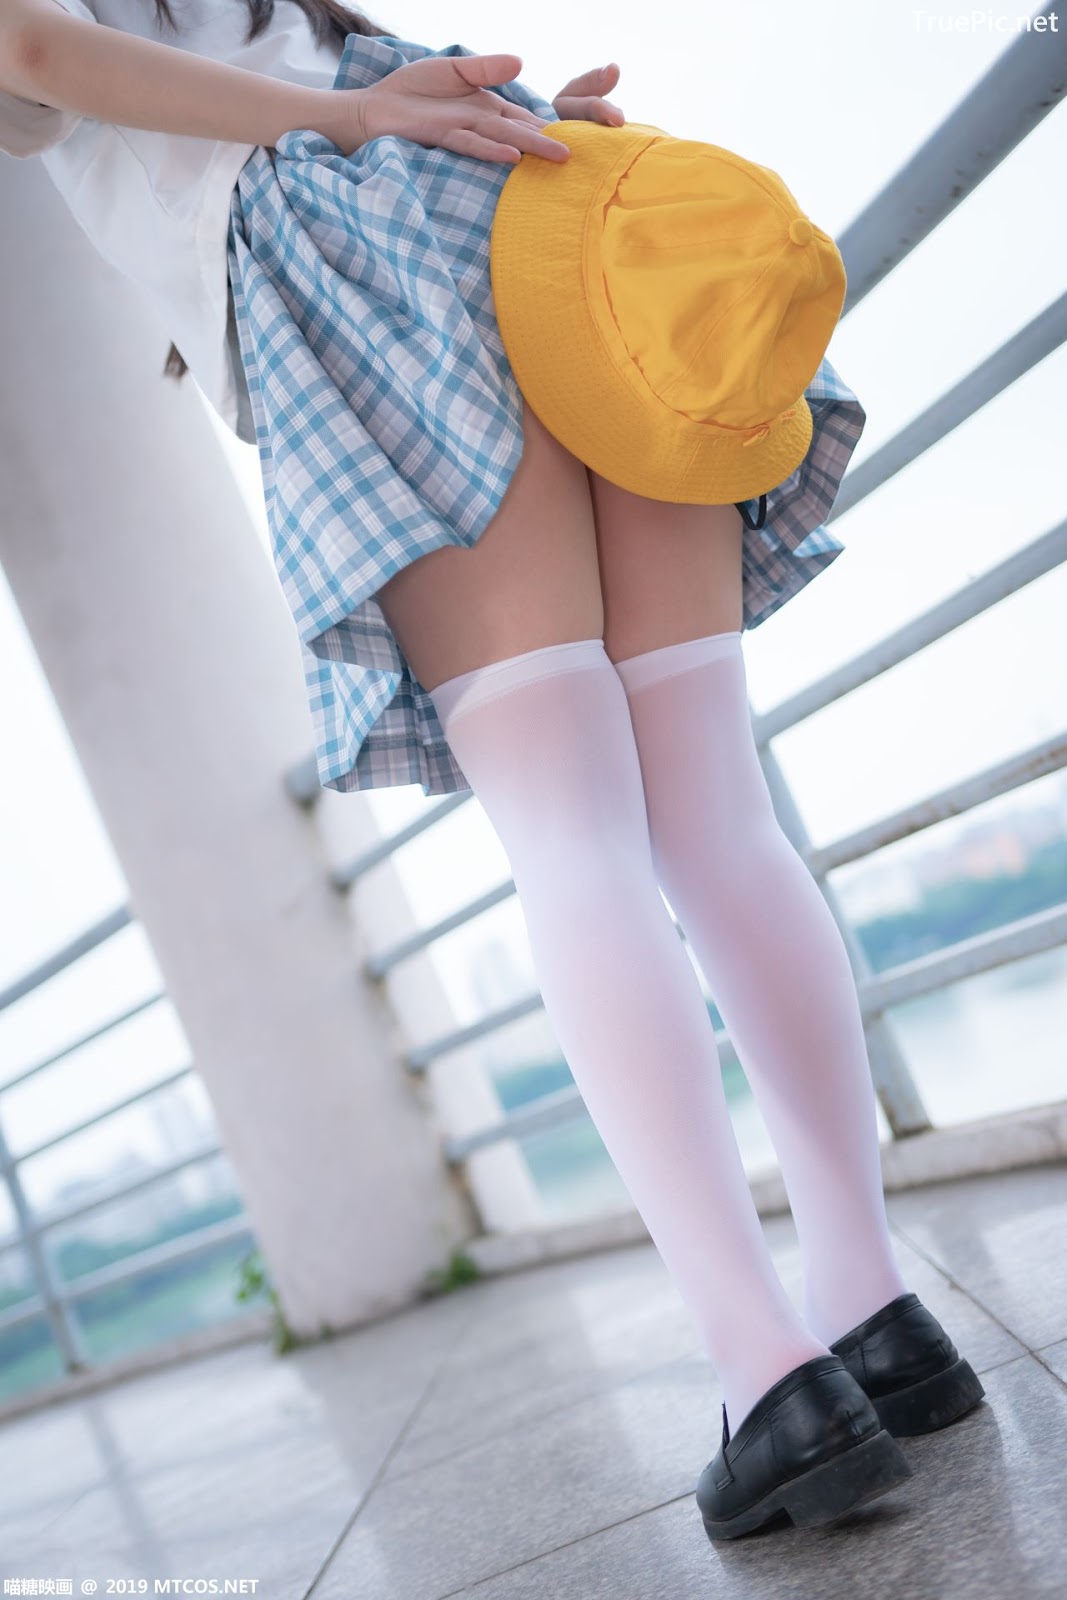 Image [MTCos] 喵糖映画 Vol.015 – Chinese Cute Model - White Shirt and Plaid Skirt - TruePic.net- Picture-14